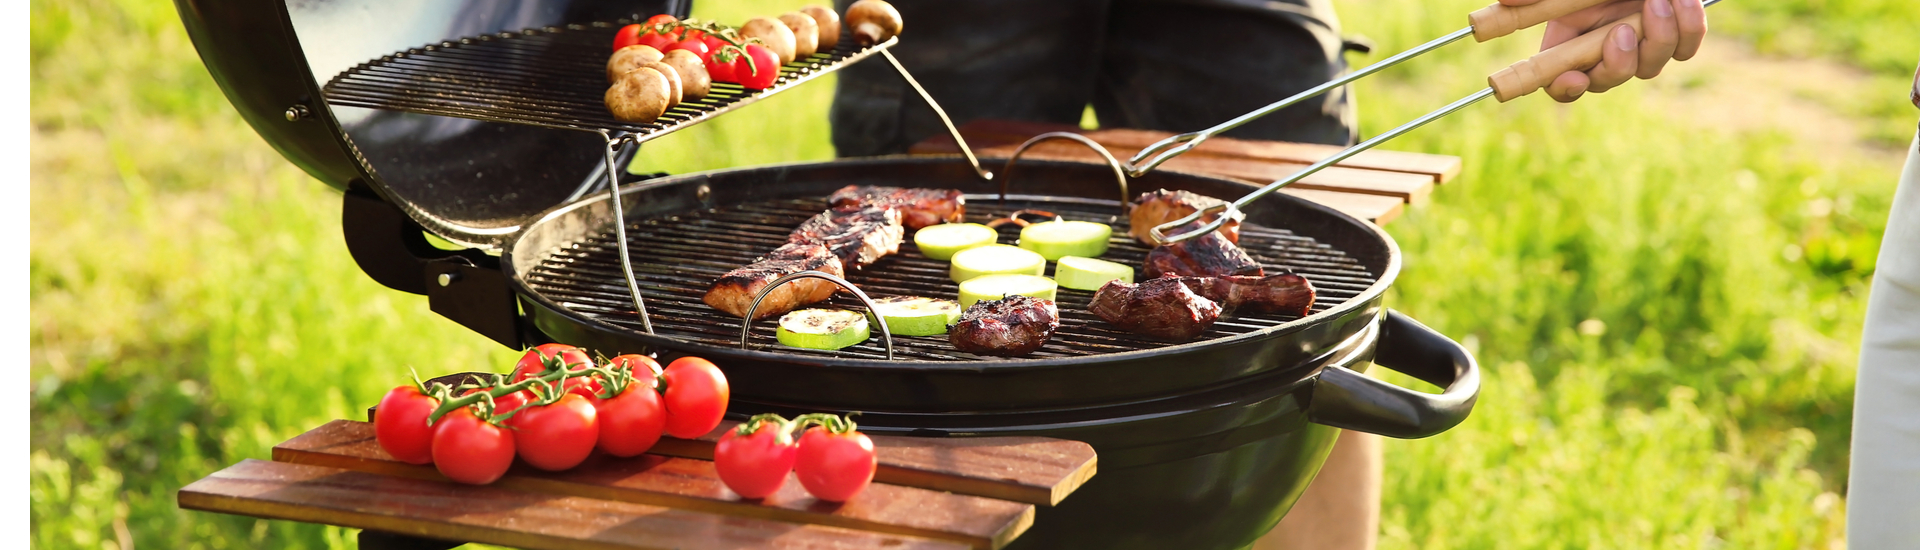 Camping Barbecue Grill